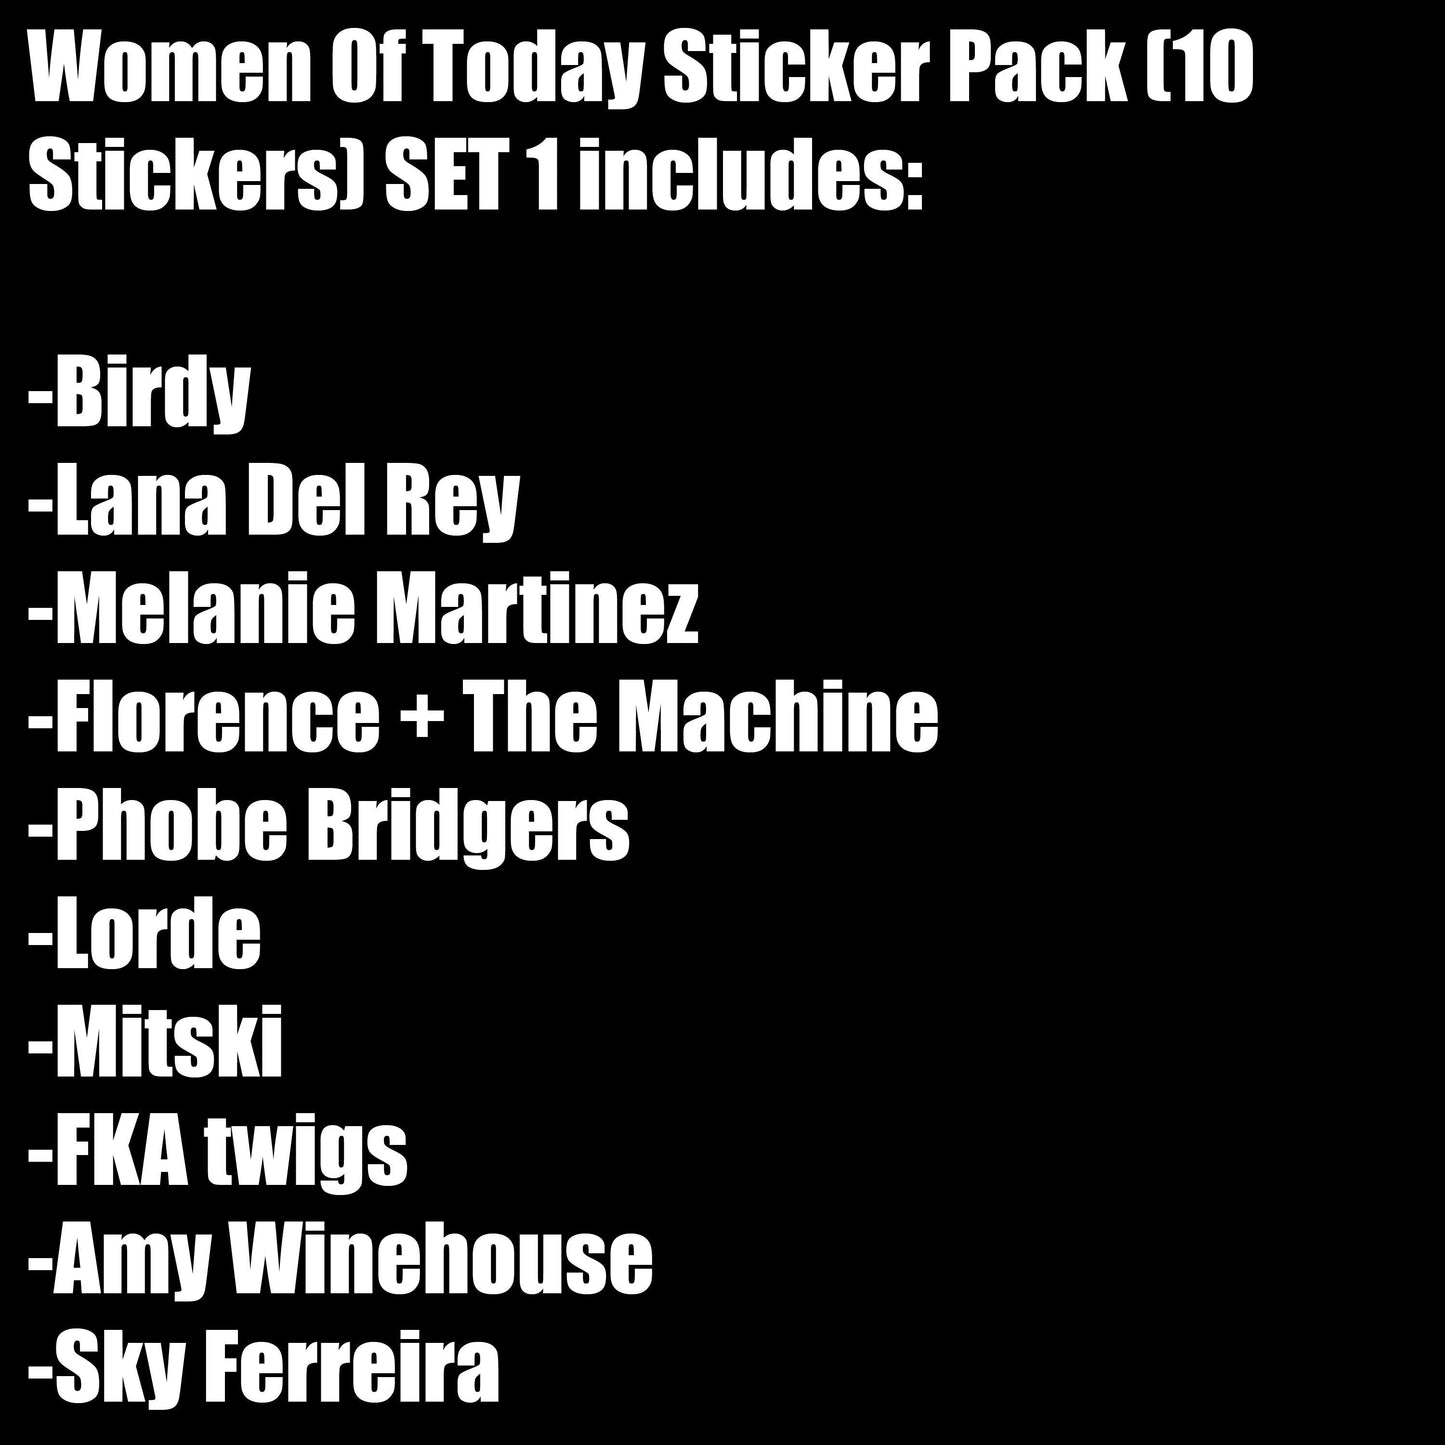 Women Of Today Sticker Pack (10 Stickers) SET 1